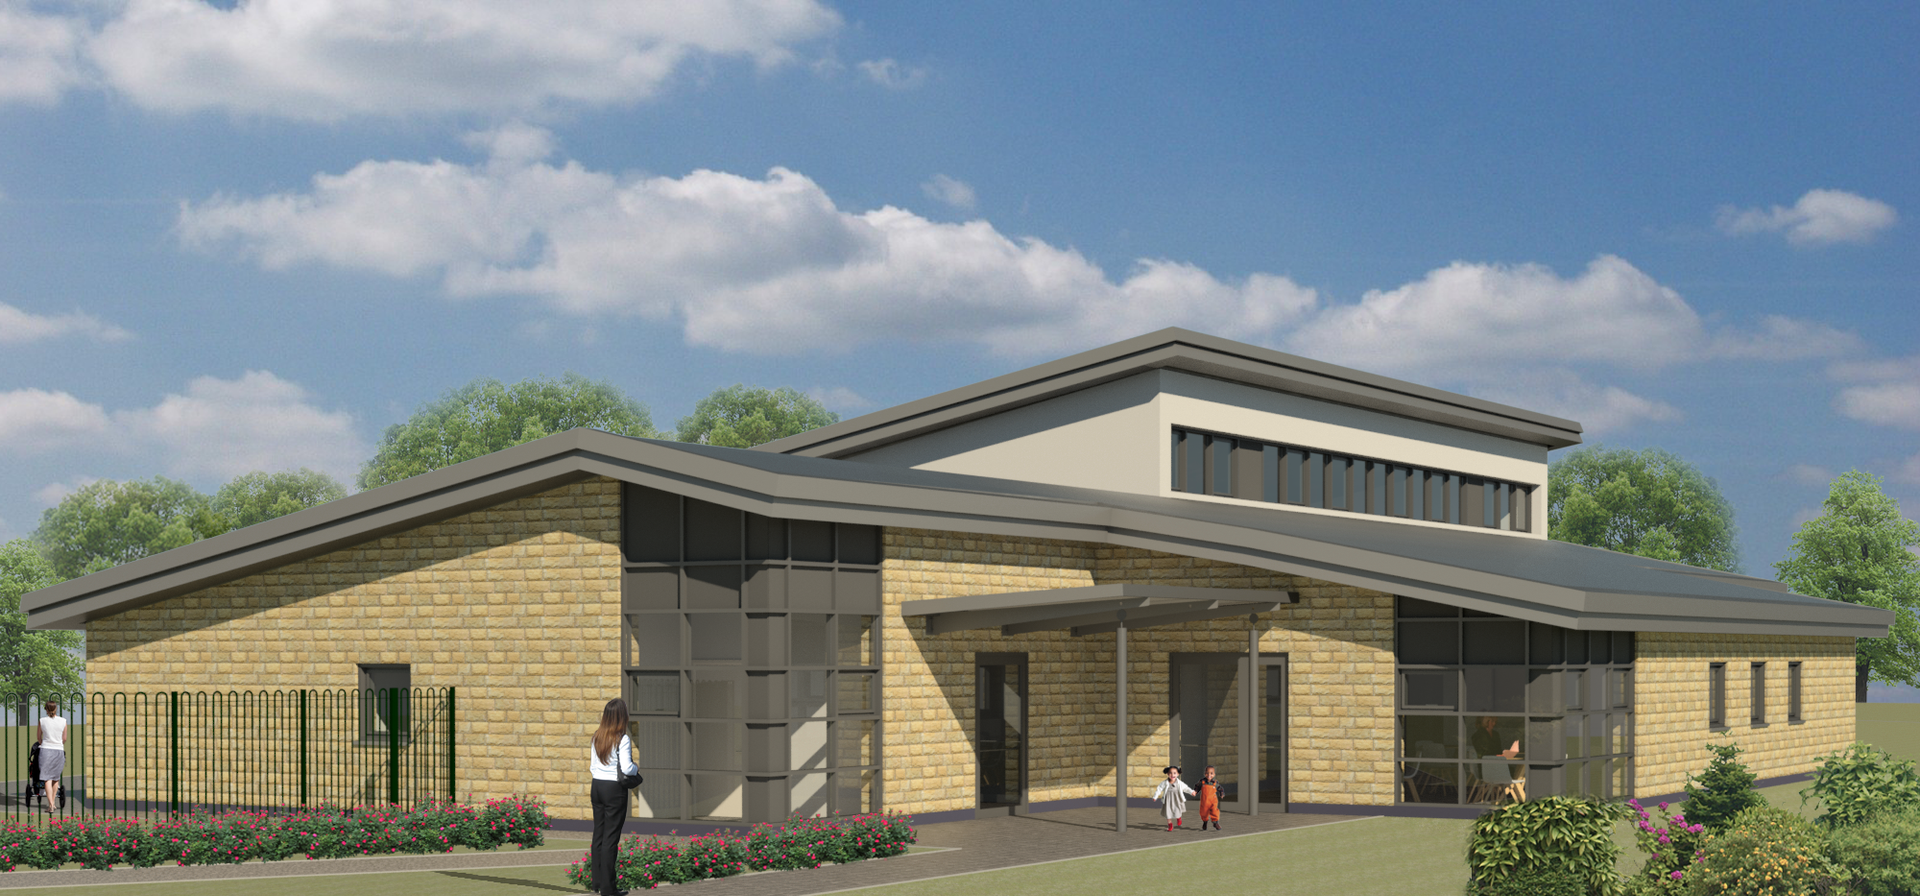 Renders for design of new Cullingworth Village Hall